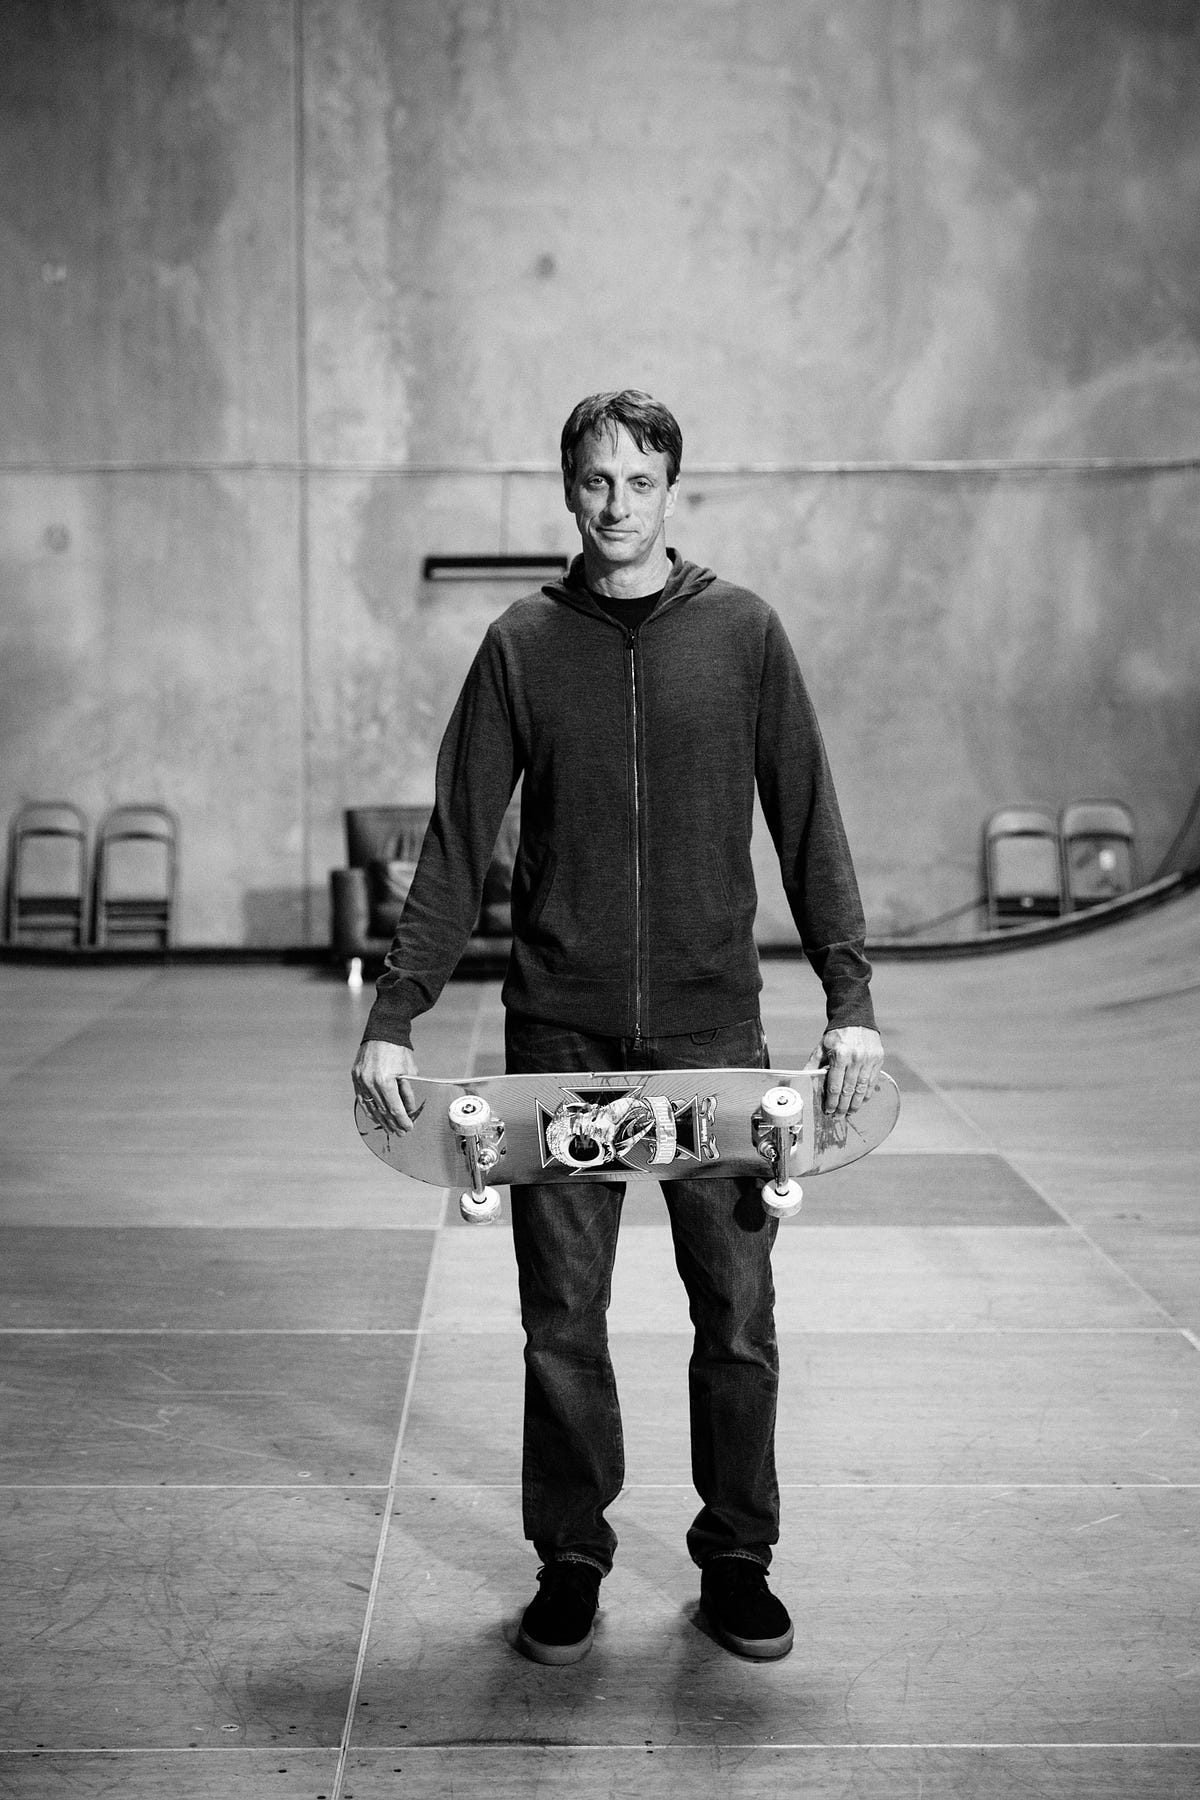 Risks and Rewards: A Conversation with Tony Hawk - Member Since